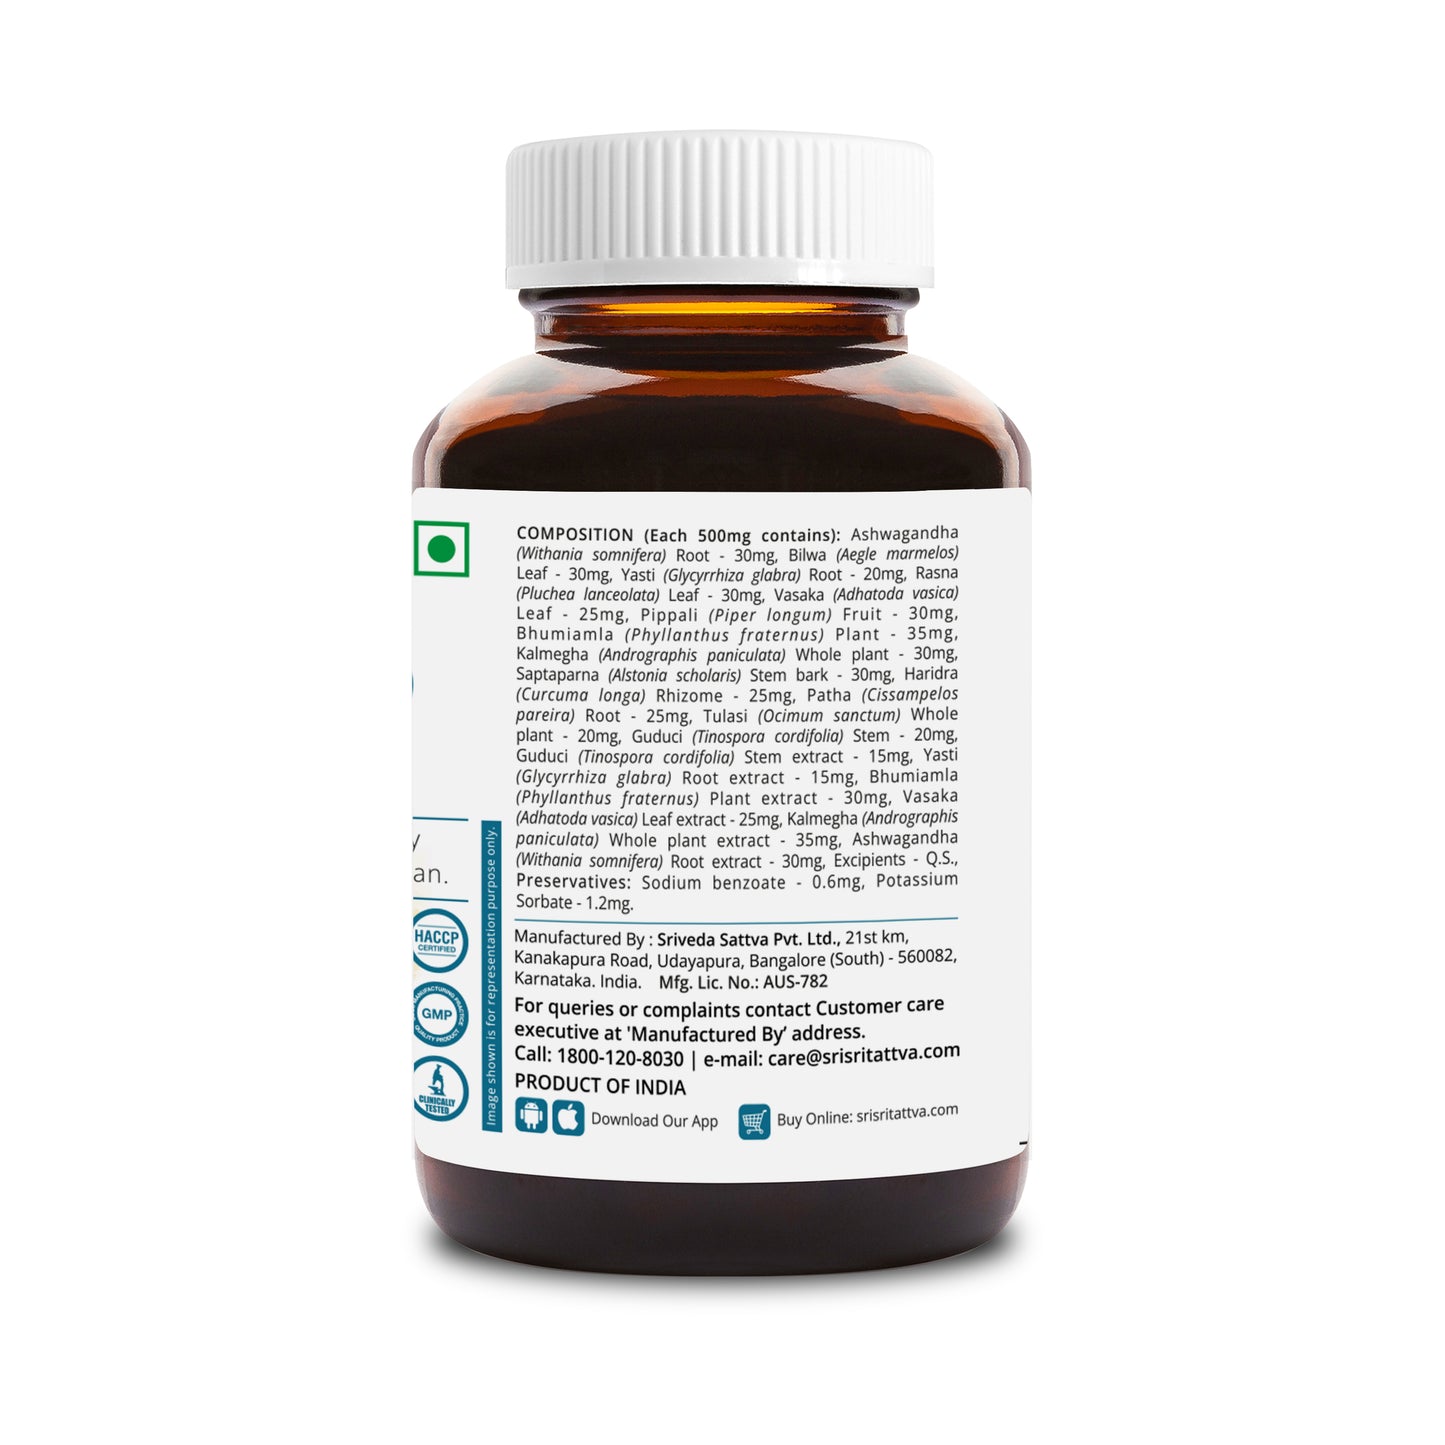 NAOQ19 - Anti Viral | Immunity Booster | Treatment For Mild To Moderate Cases Of Covid | 60 Tabs, 500 mg